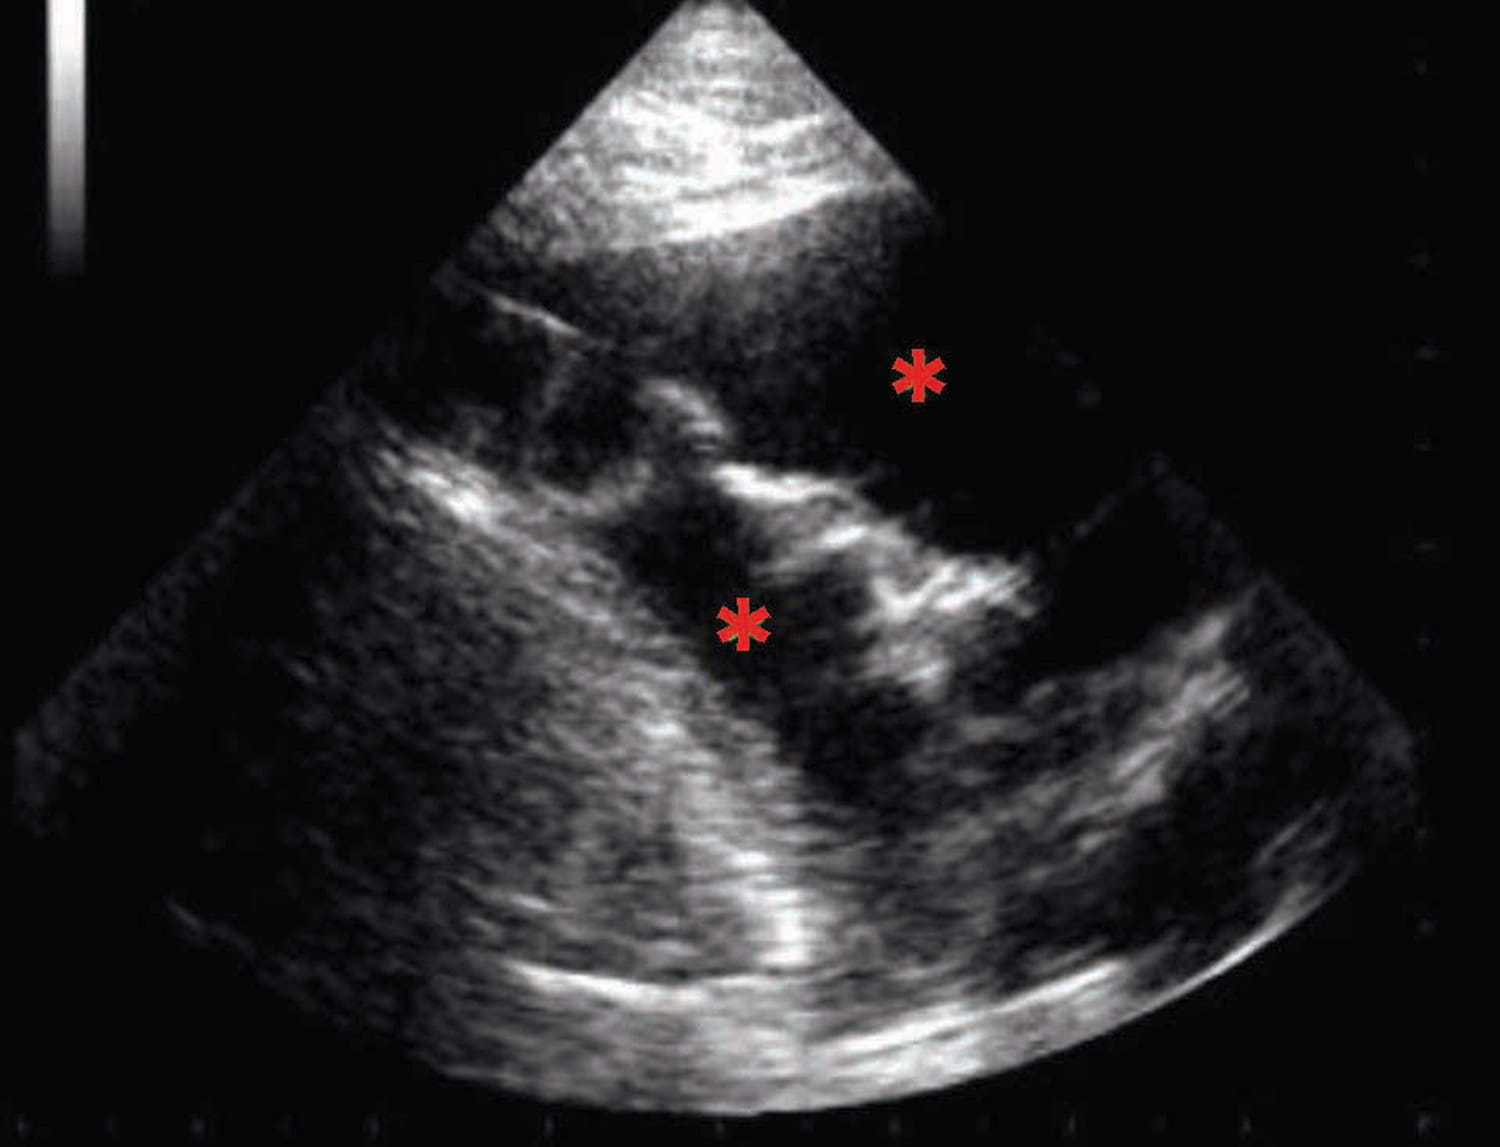 pleural effusion characterized by hypoechoeic areas in the chest cavity 